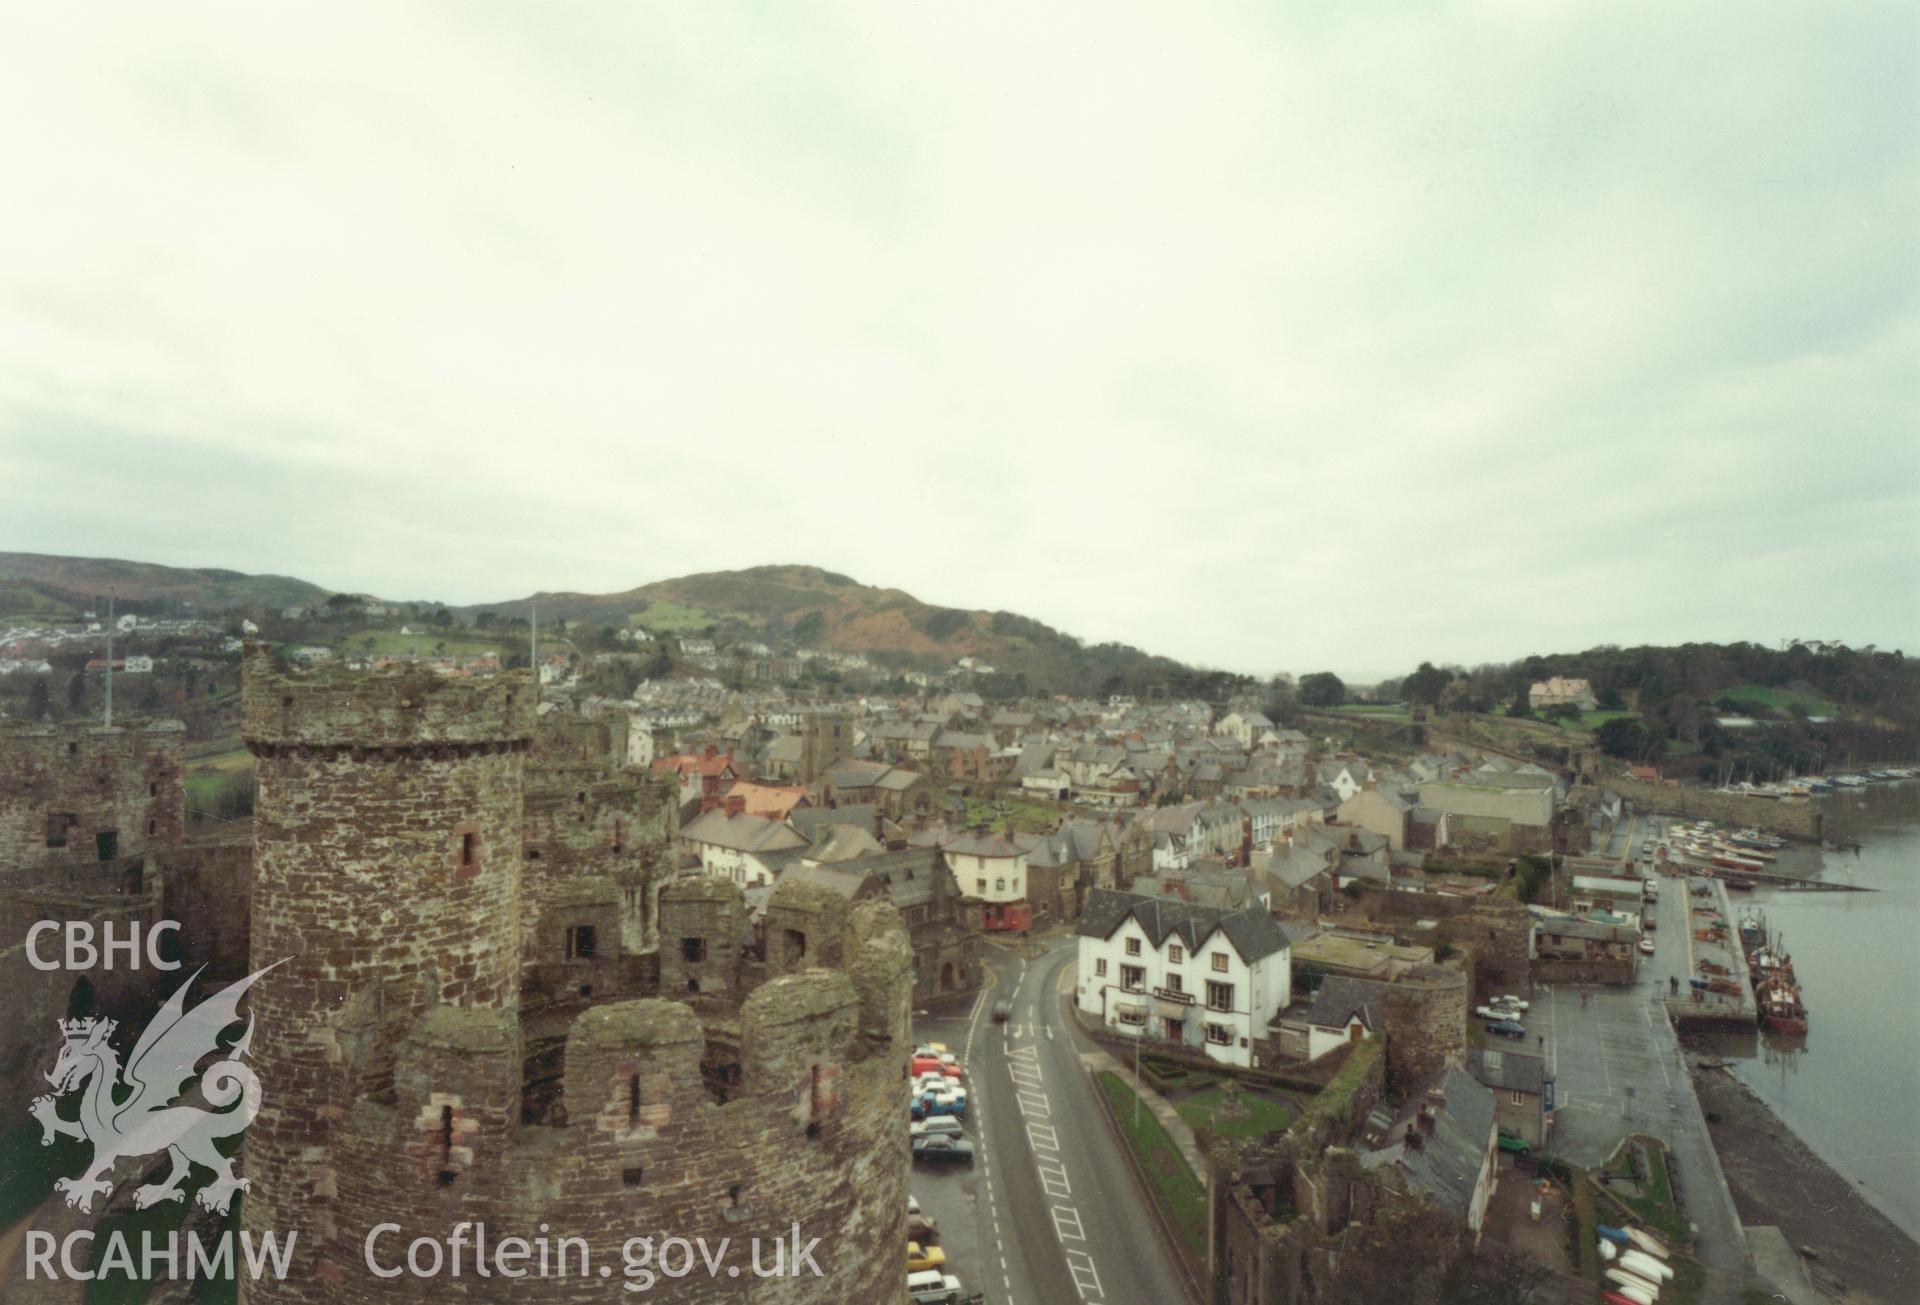 1 of a set of 27 colour prints: print showing view of town from Conwy castle, collated by the former Central Office of Information.